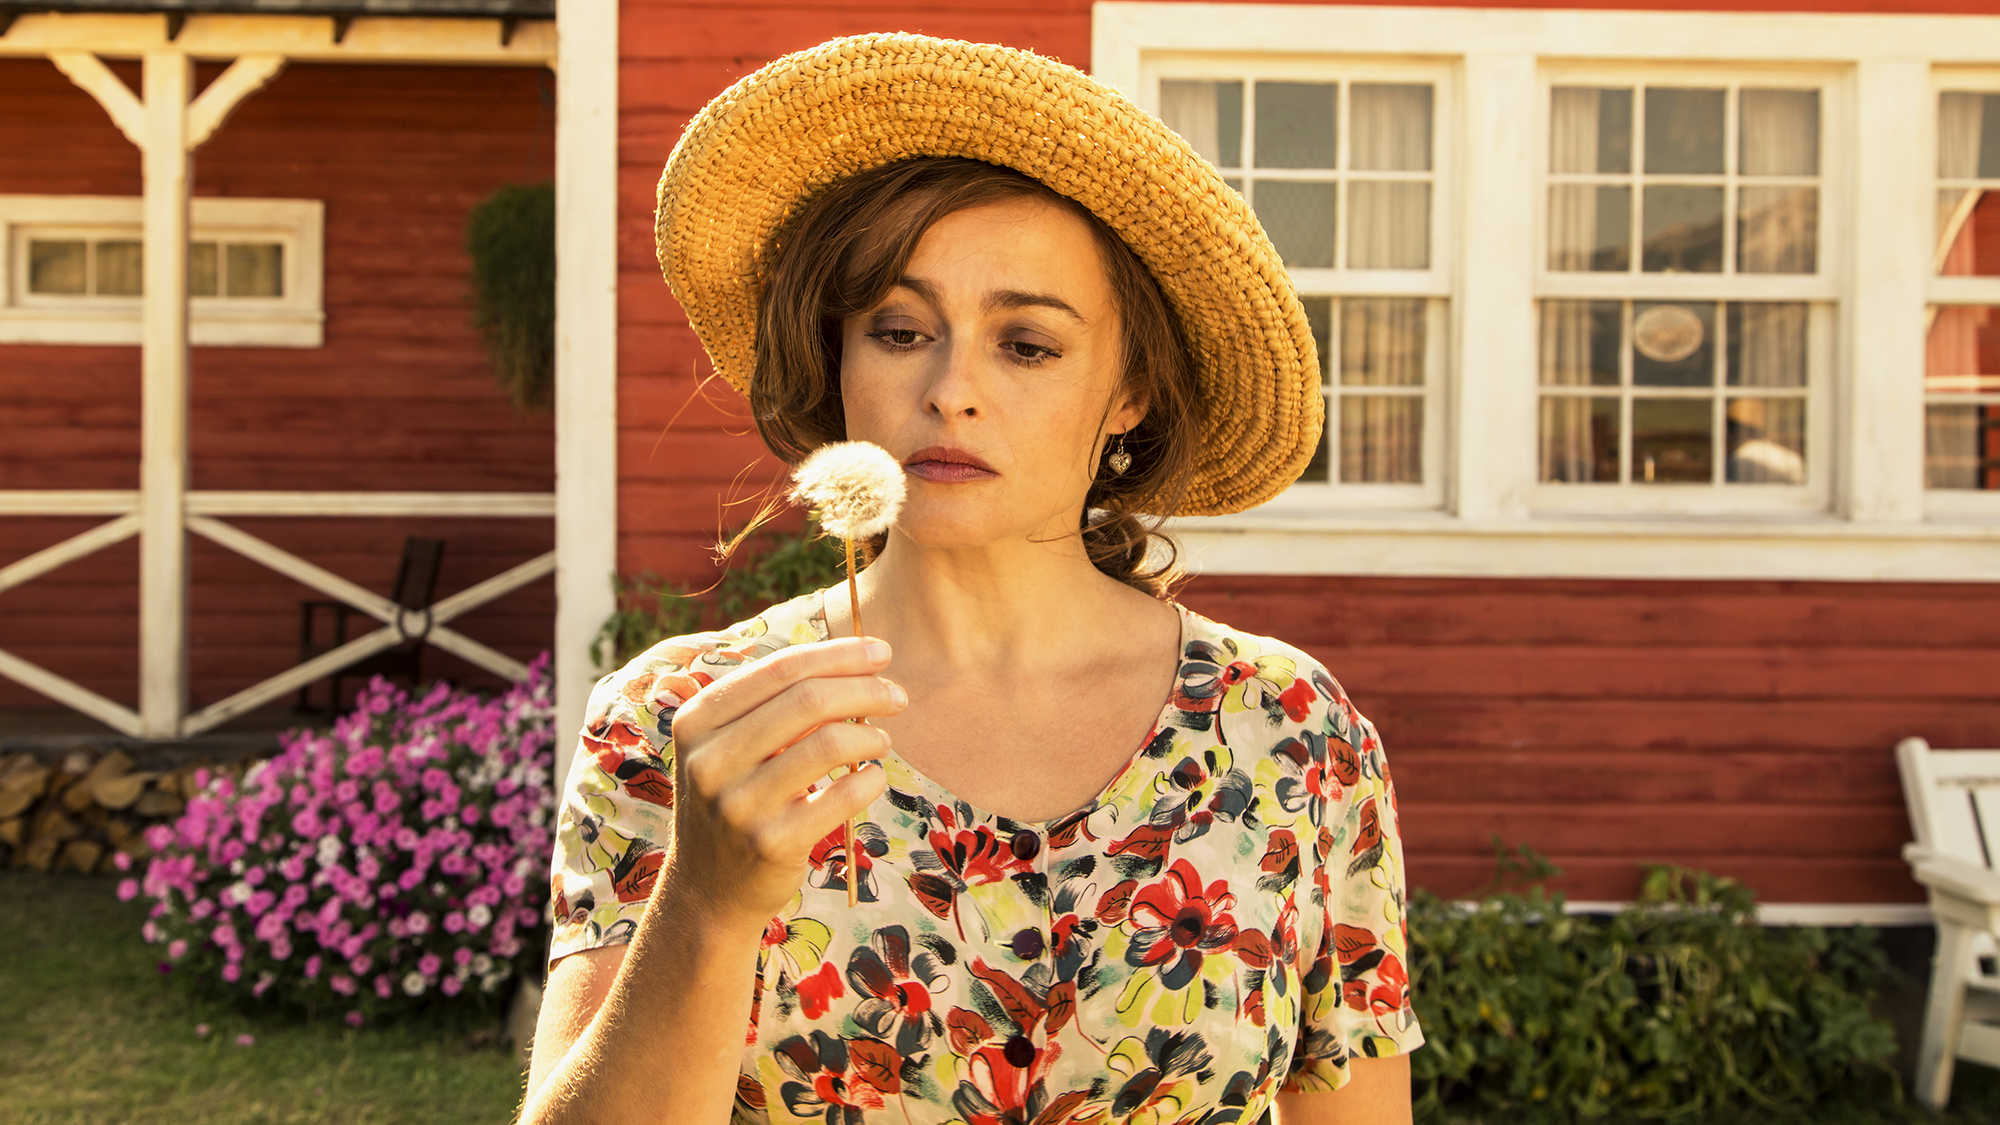 The Young and Prodigious T.S. Spivet 3D (image 4)